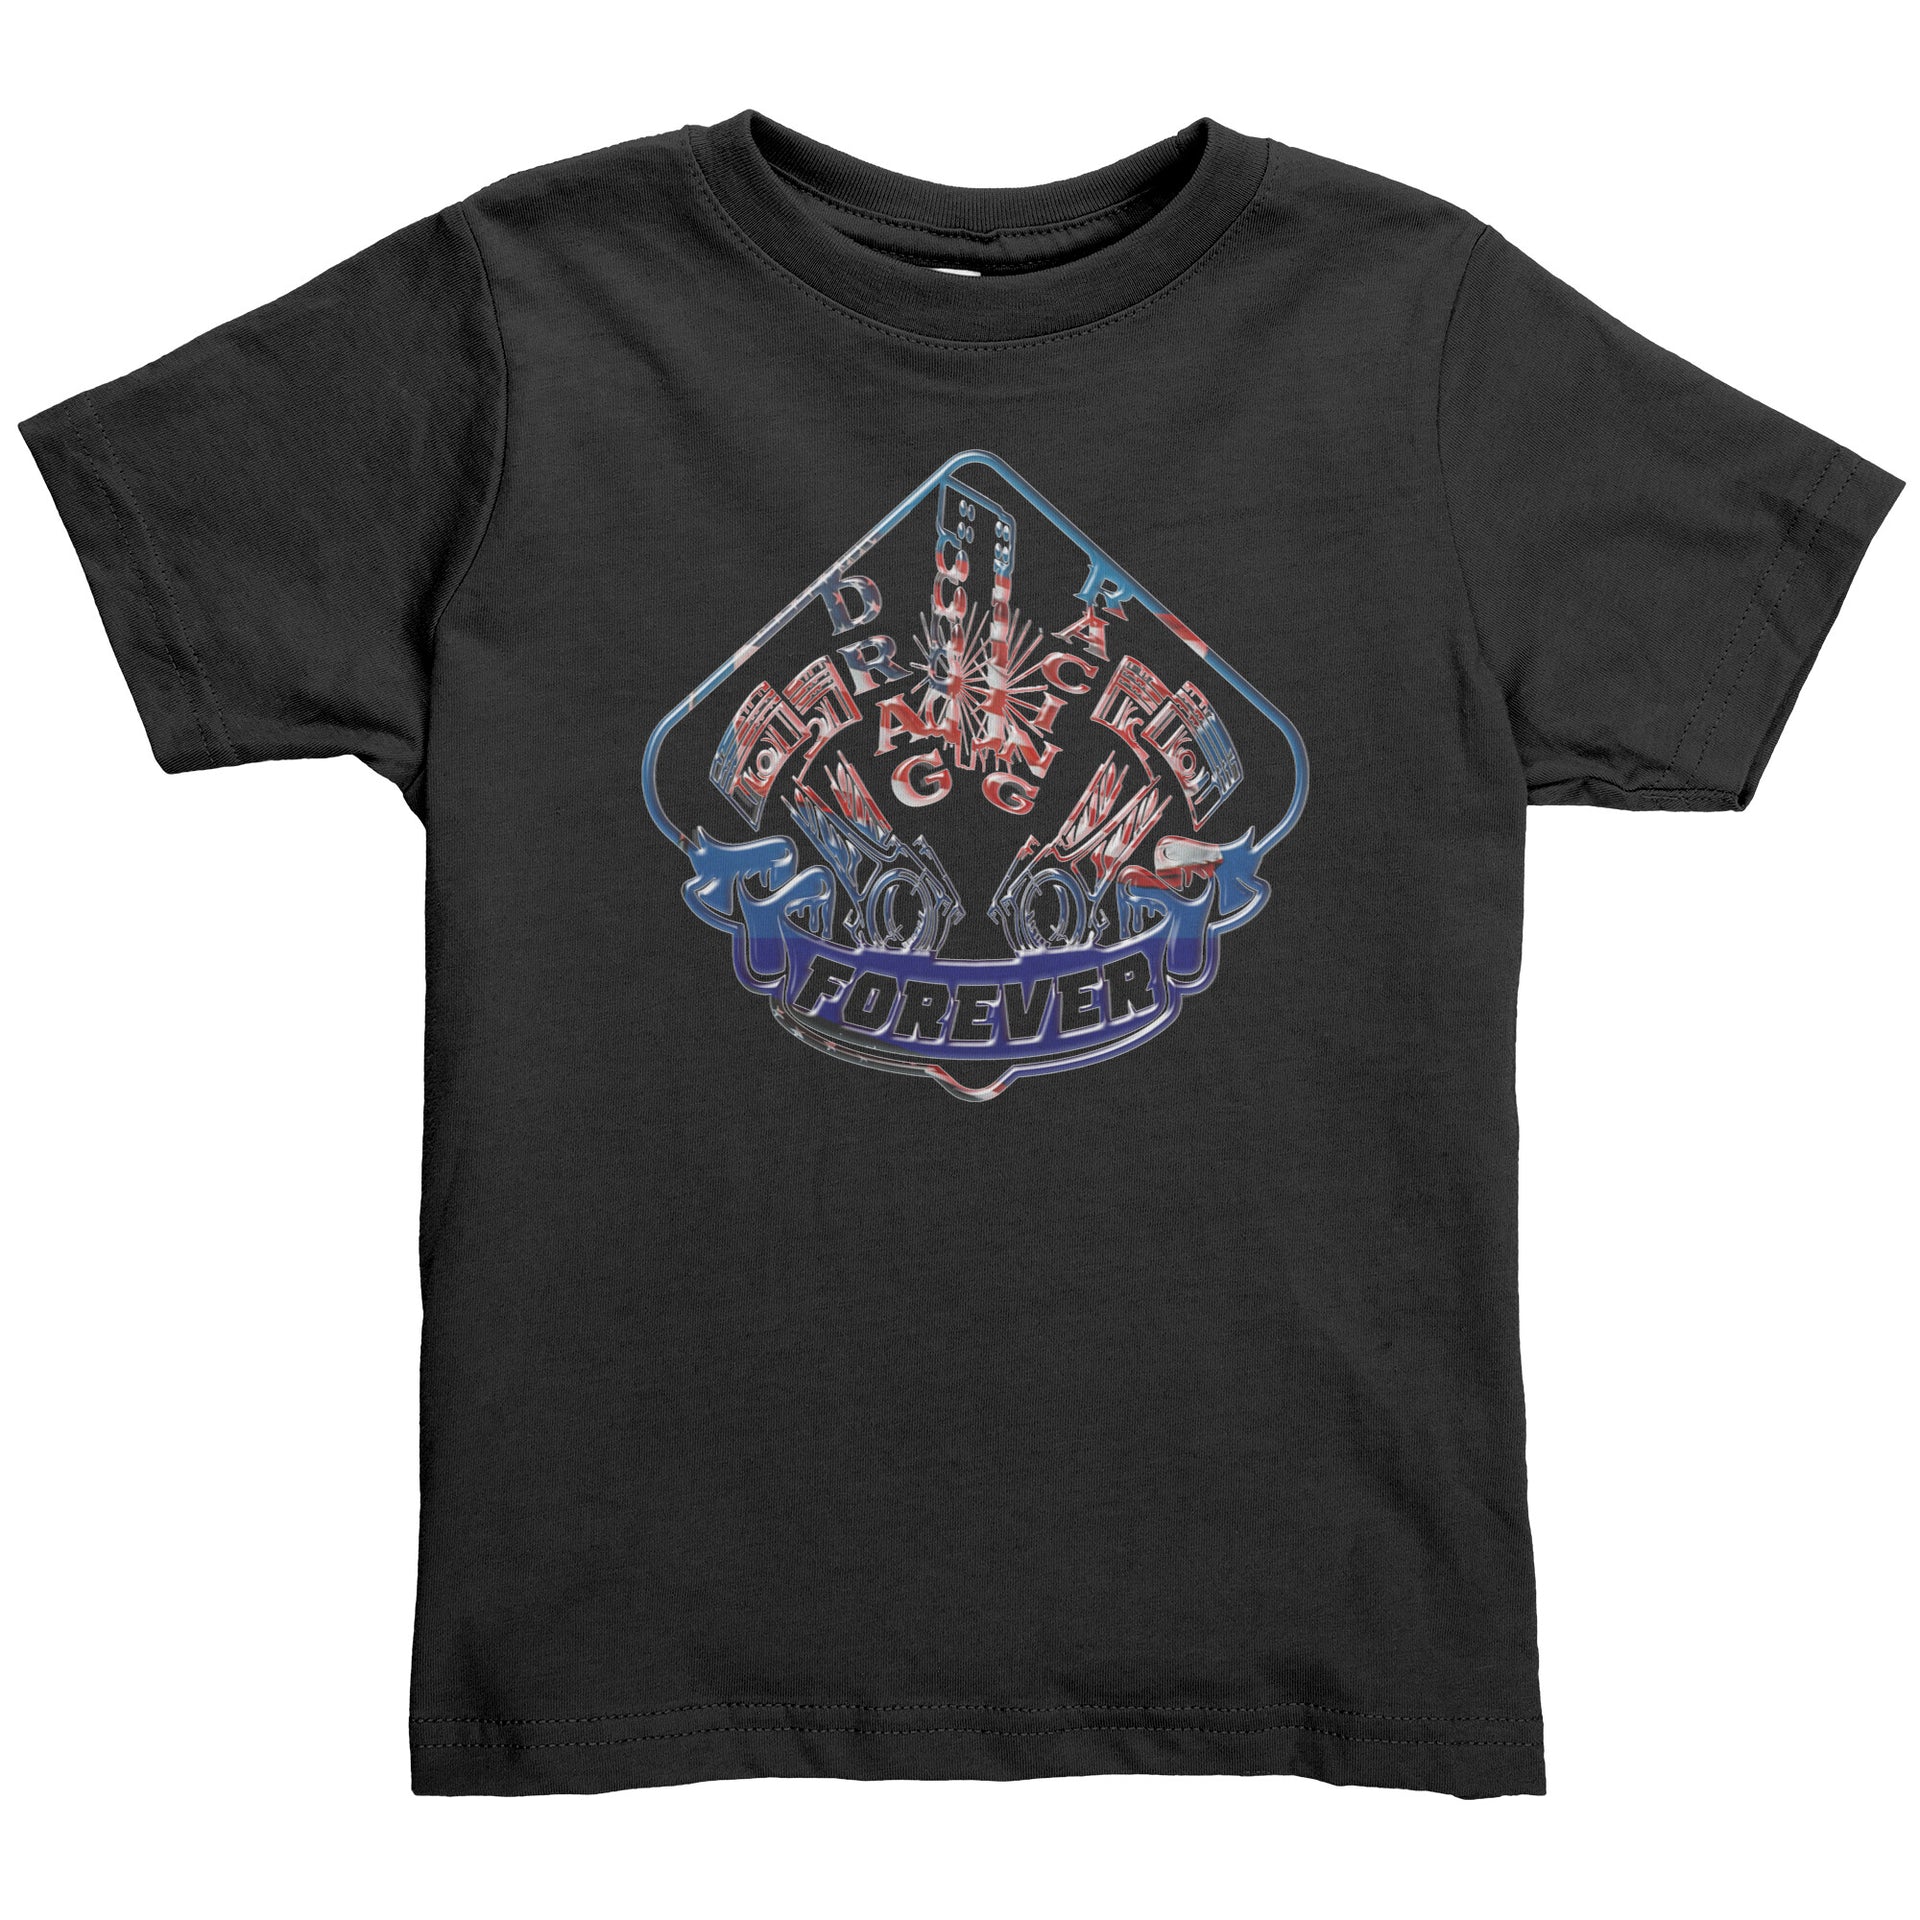 USA Drag Racing Forever Baby T-shirts